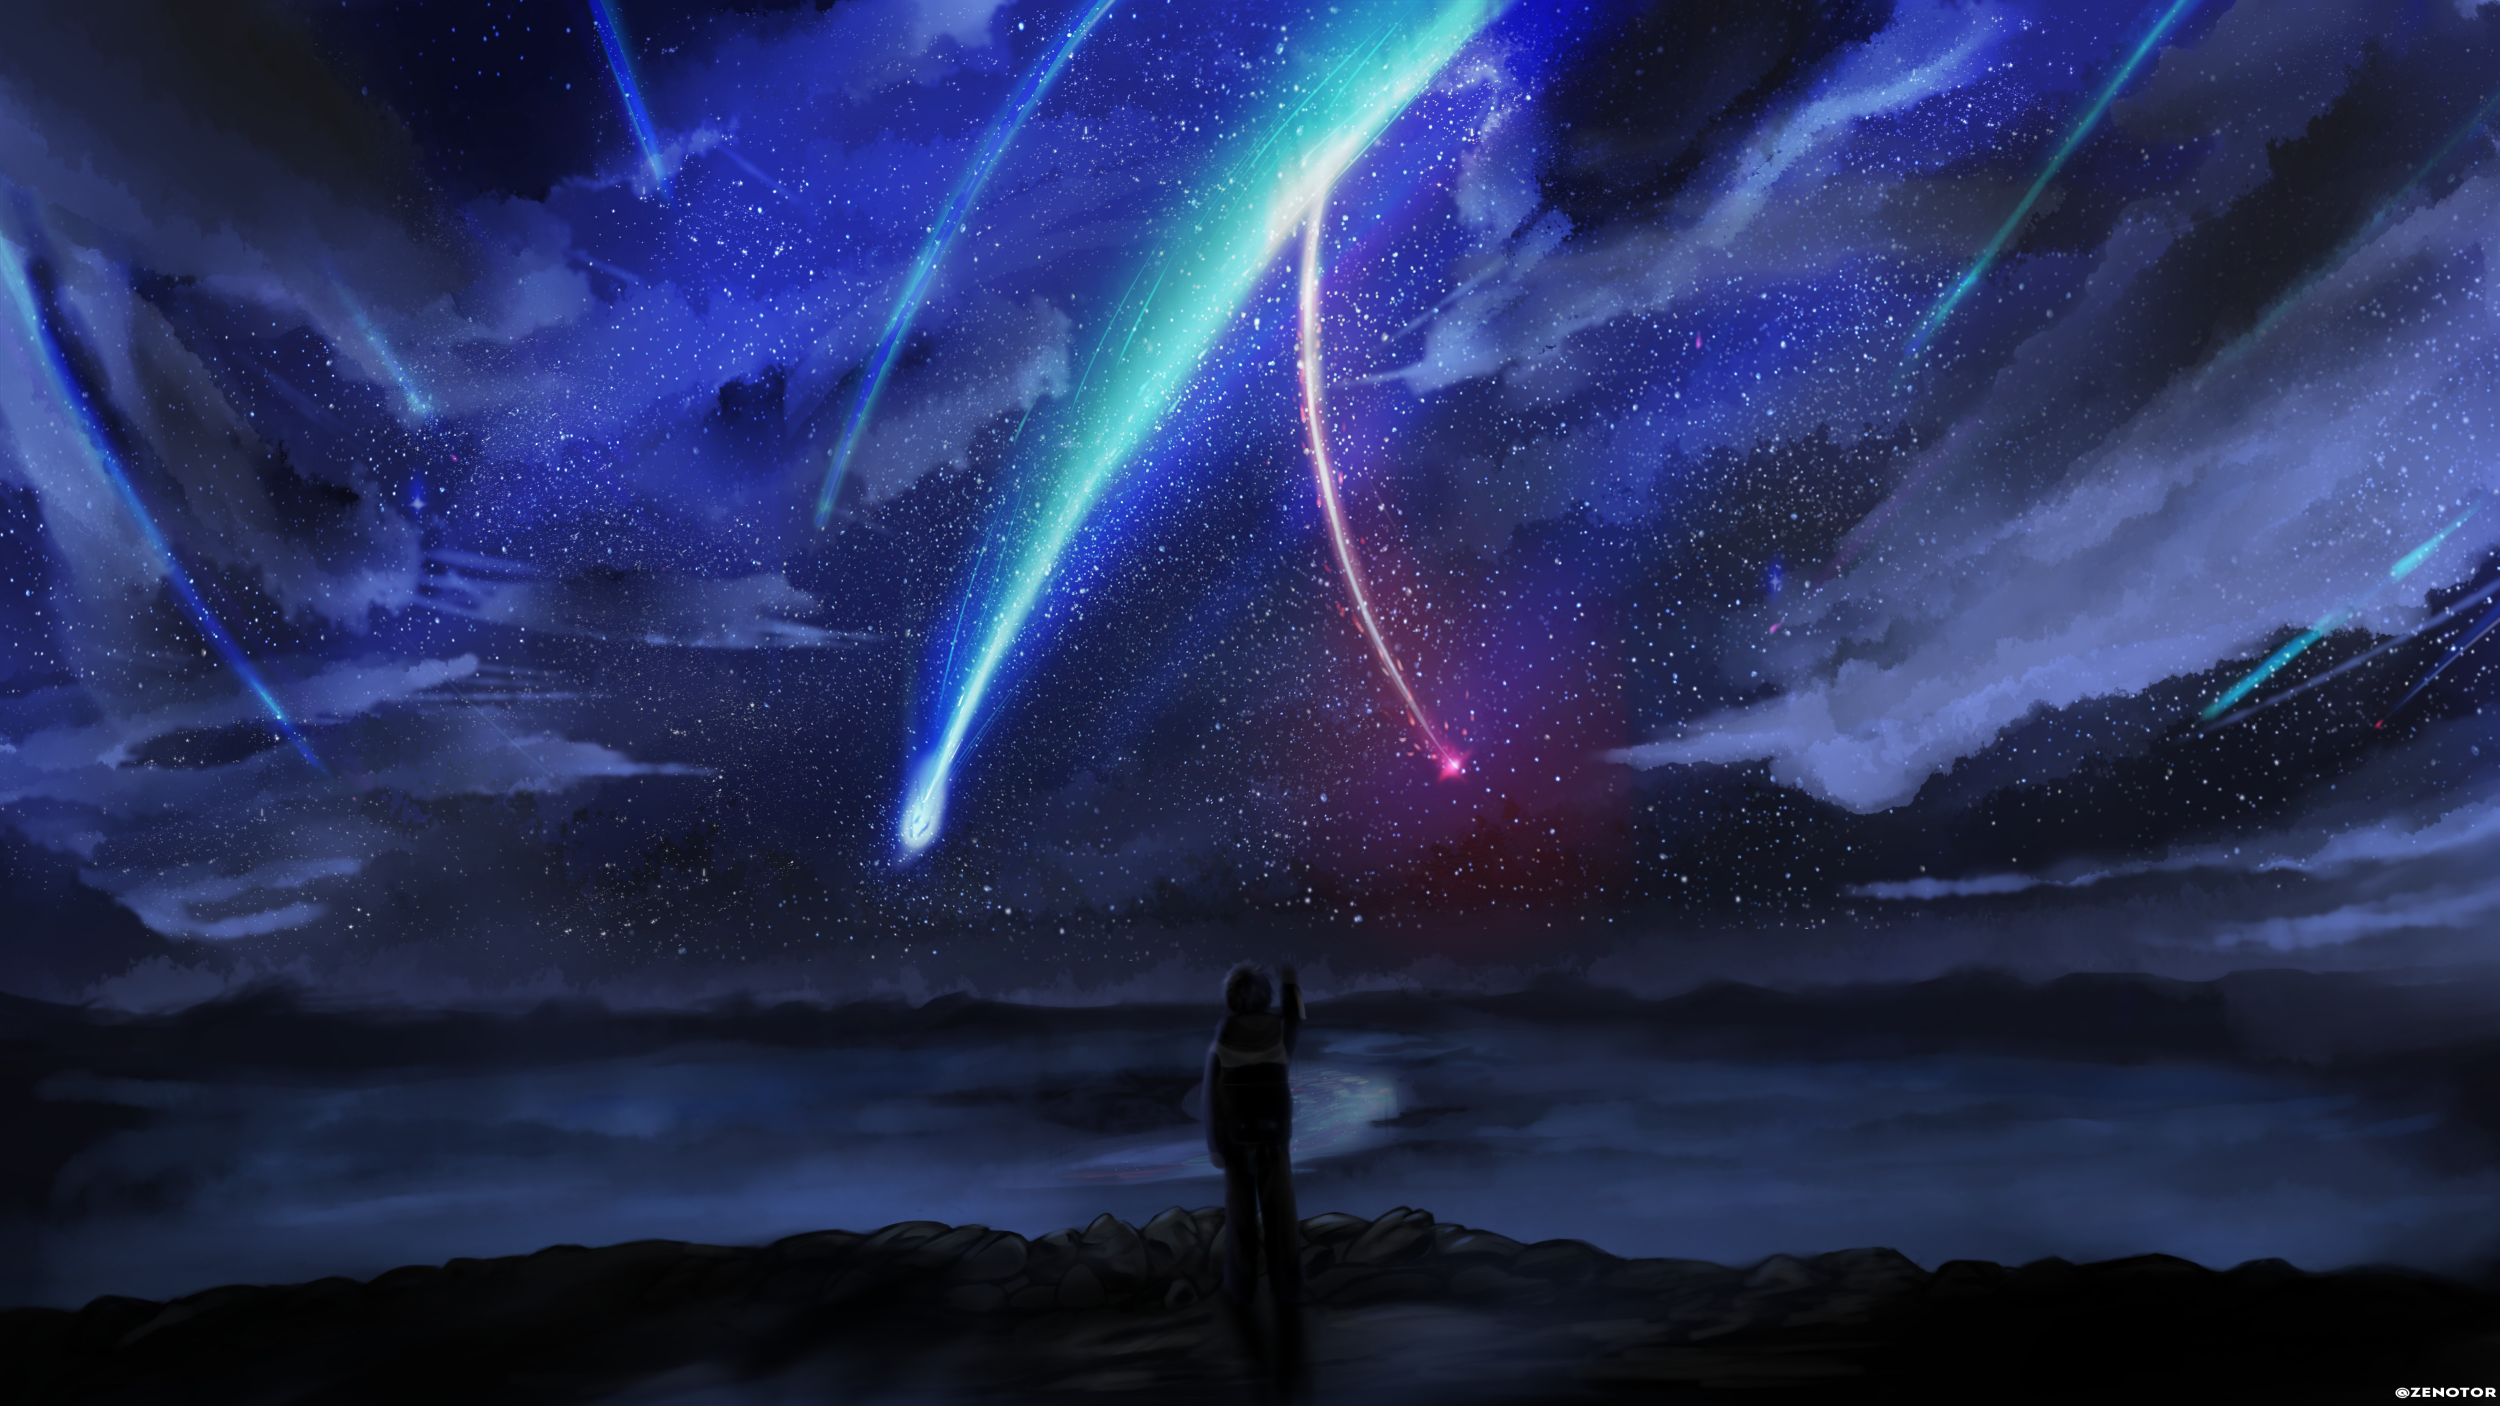 1219 Your Name. HD Wallpapers | Backgrounds - Wallpaper Abyss - Page 9